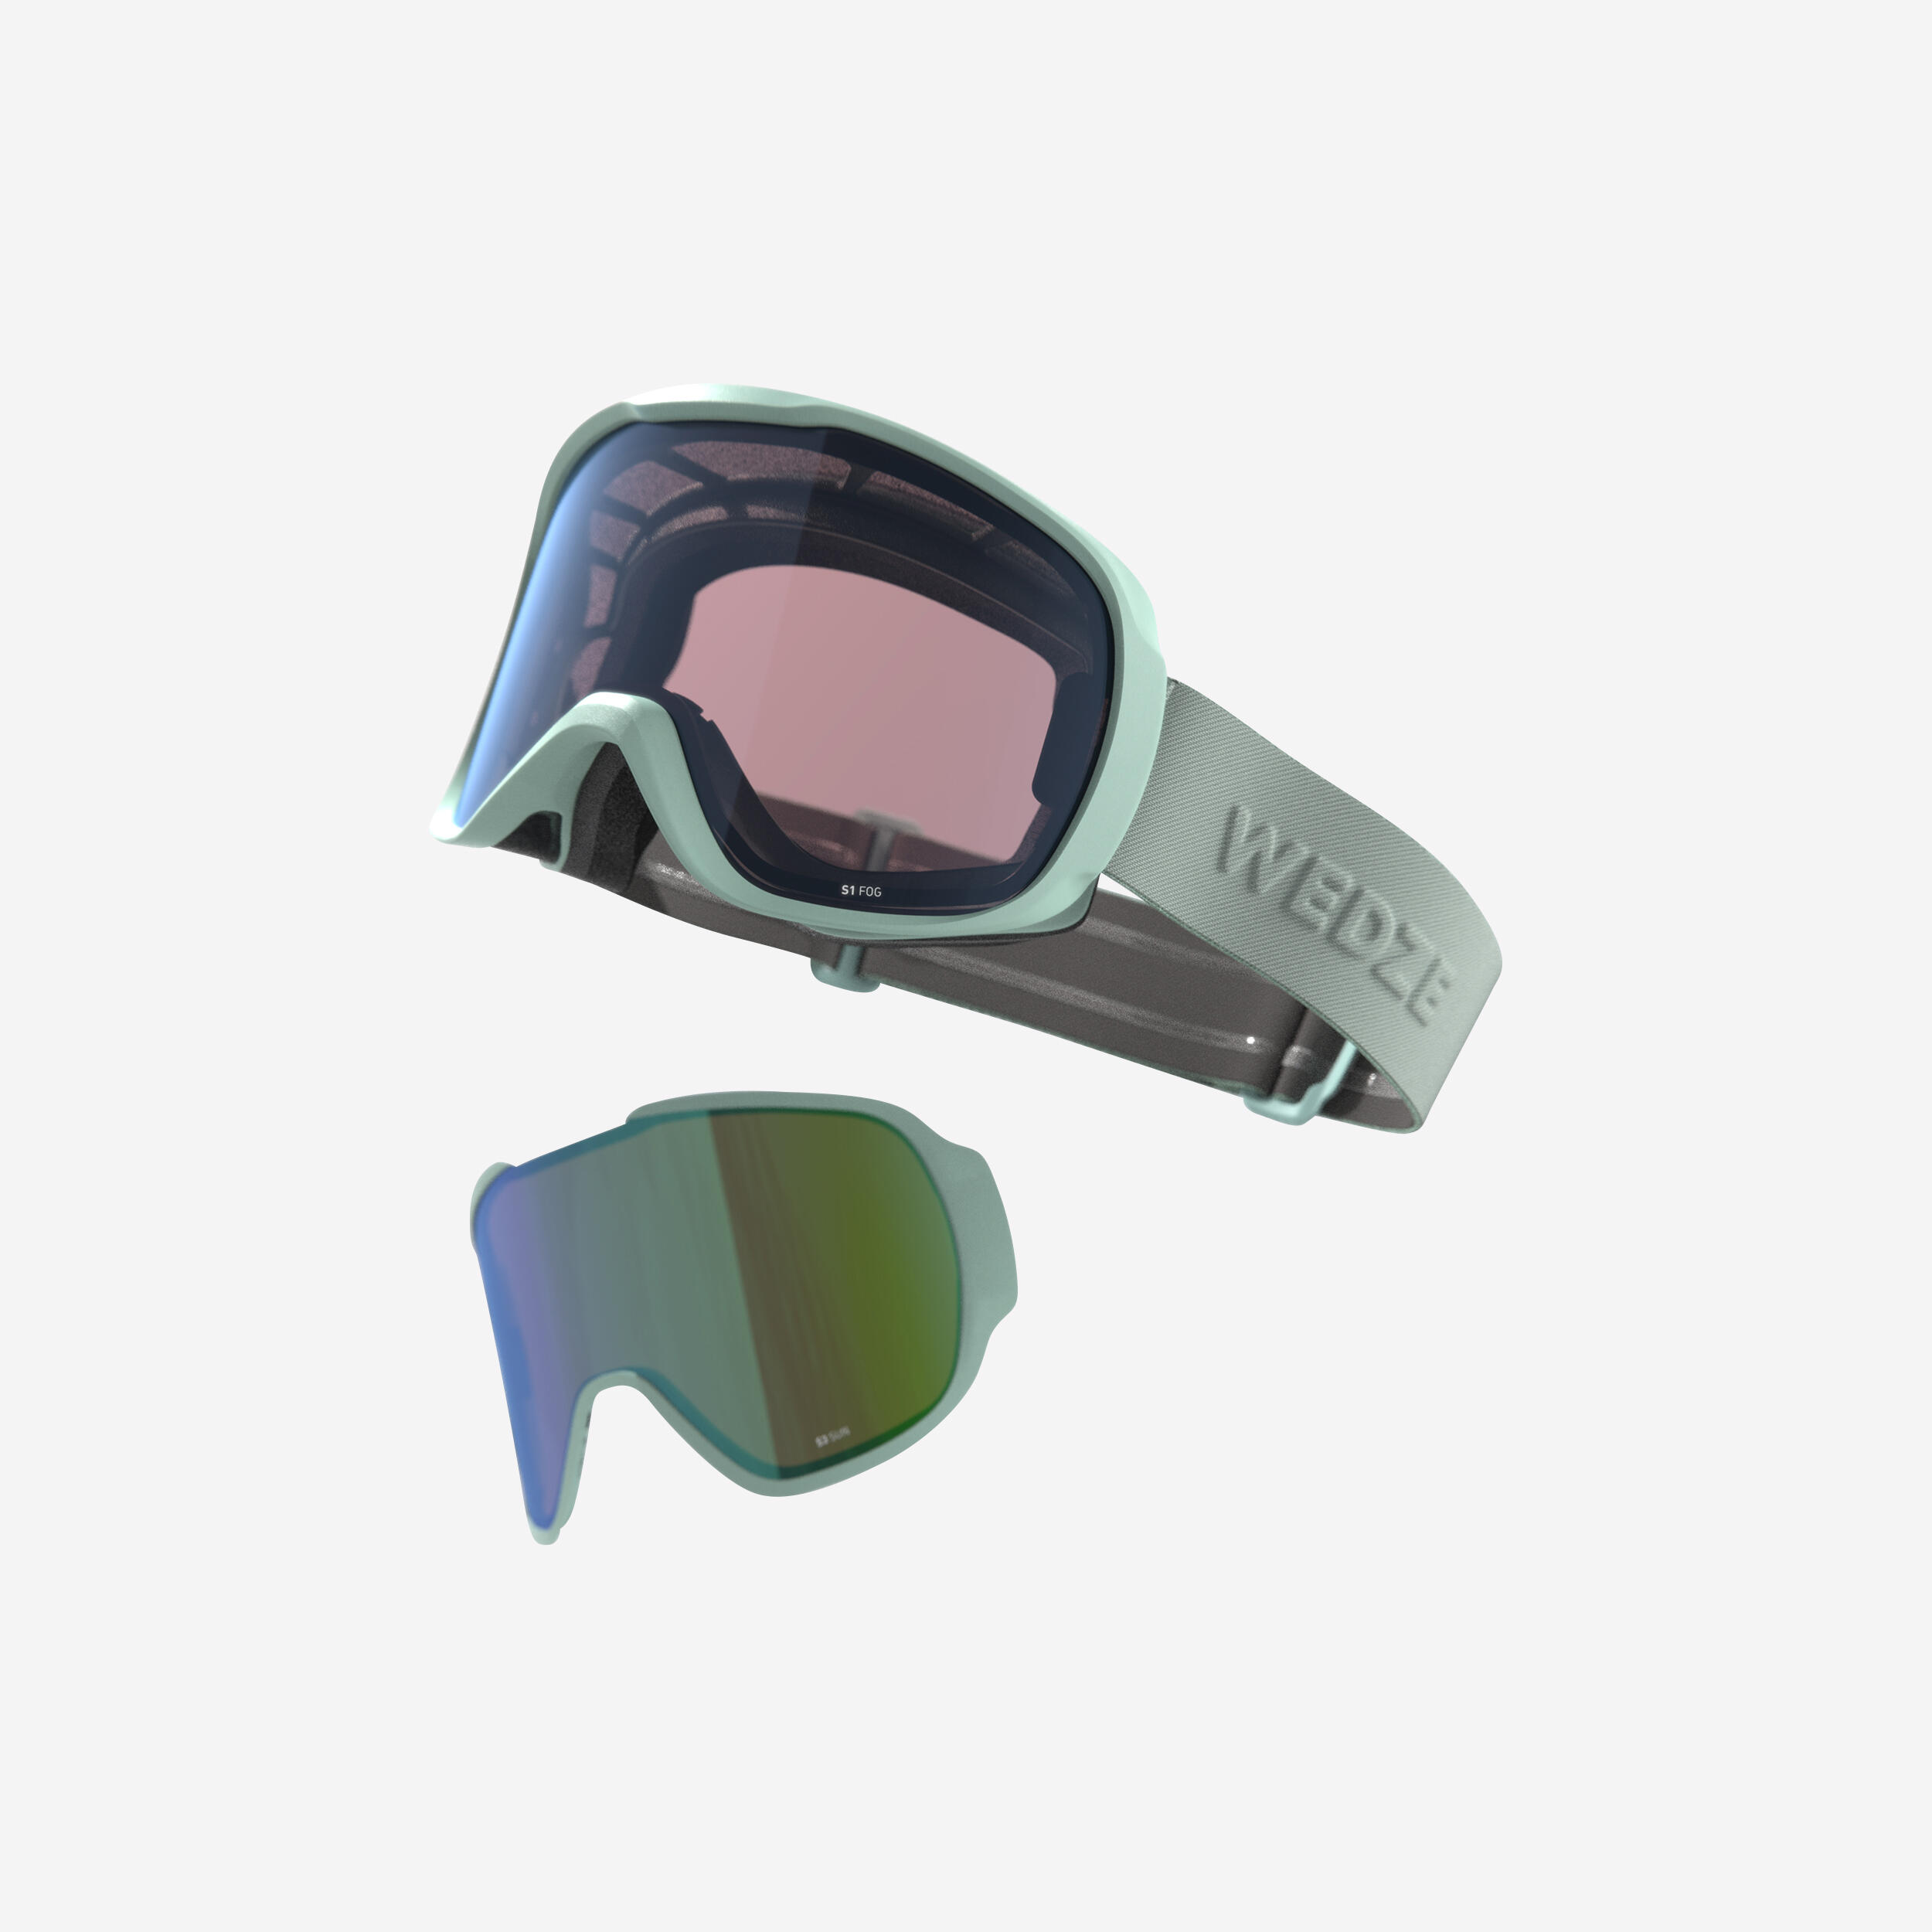 WEDZE KIDS’ AND ADULT SKIING AND SNOWBOARDING GOGGLES ALL WEATHER - G 500 I - GREEN